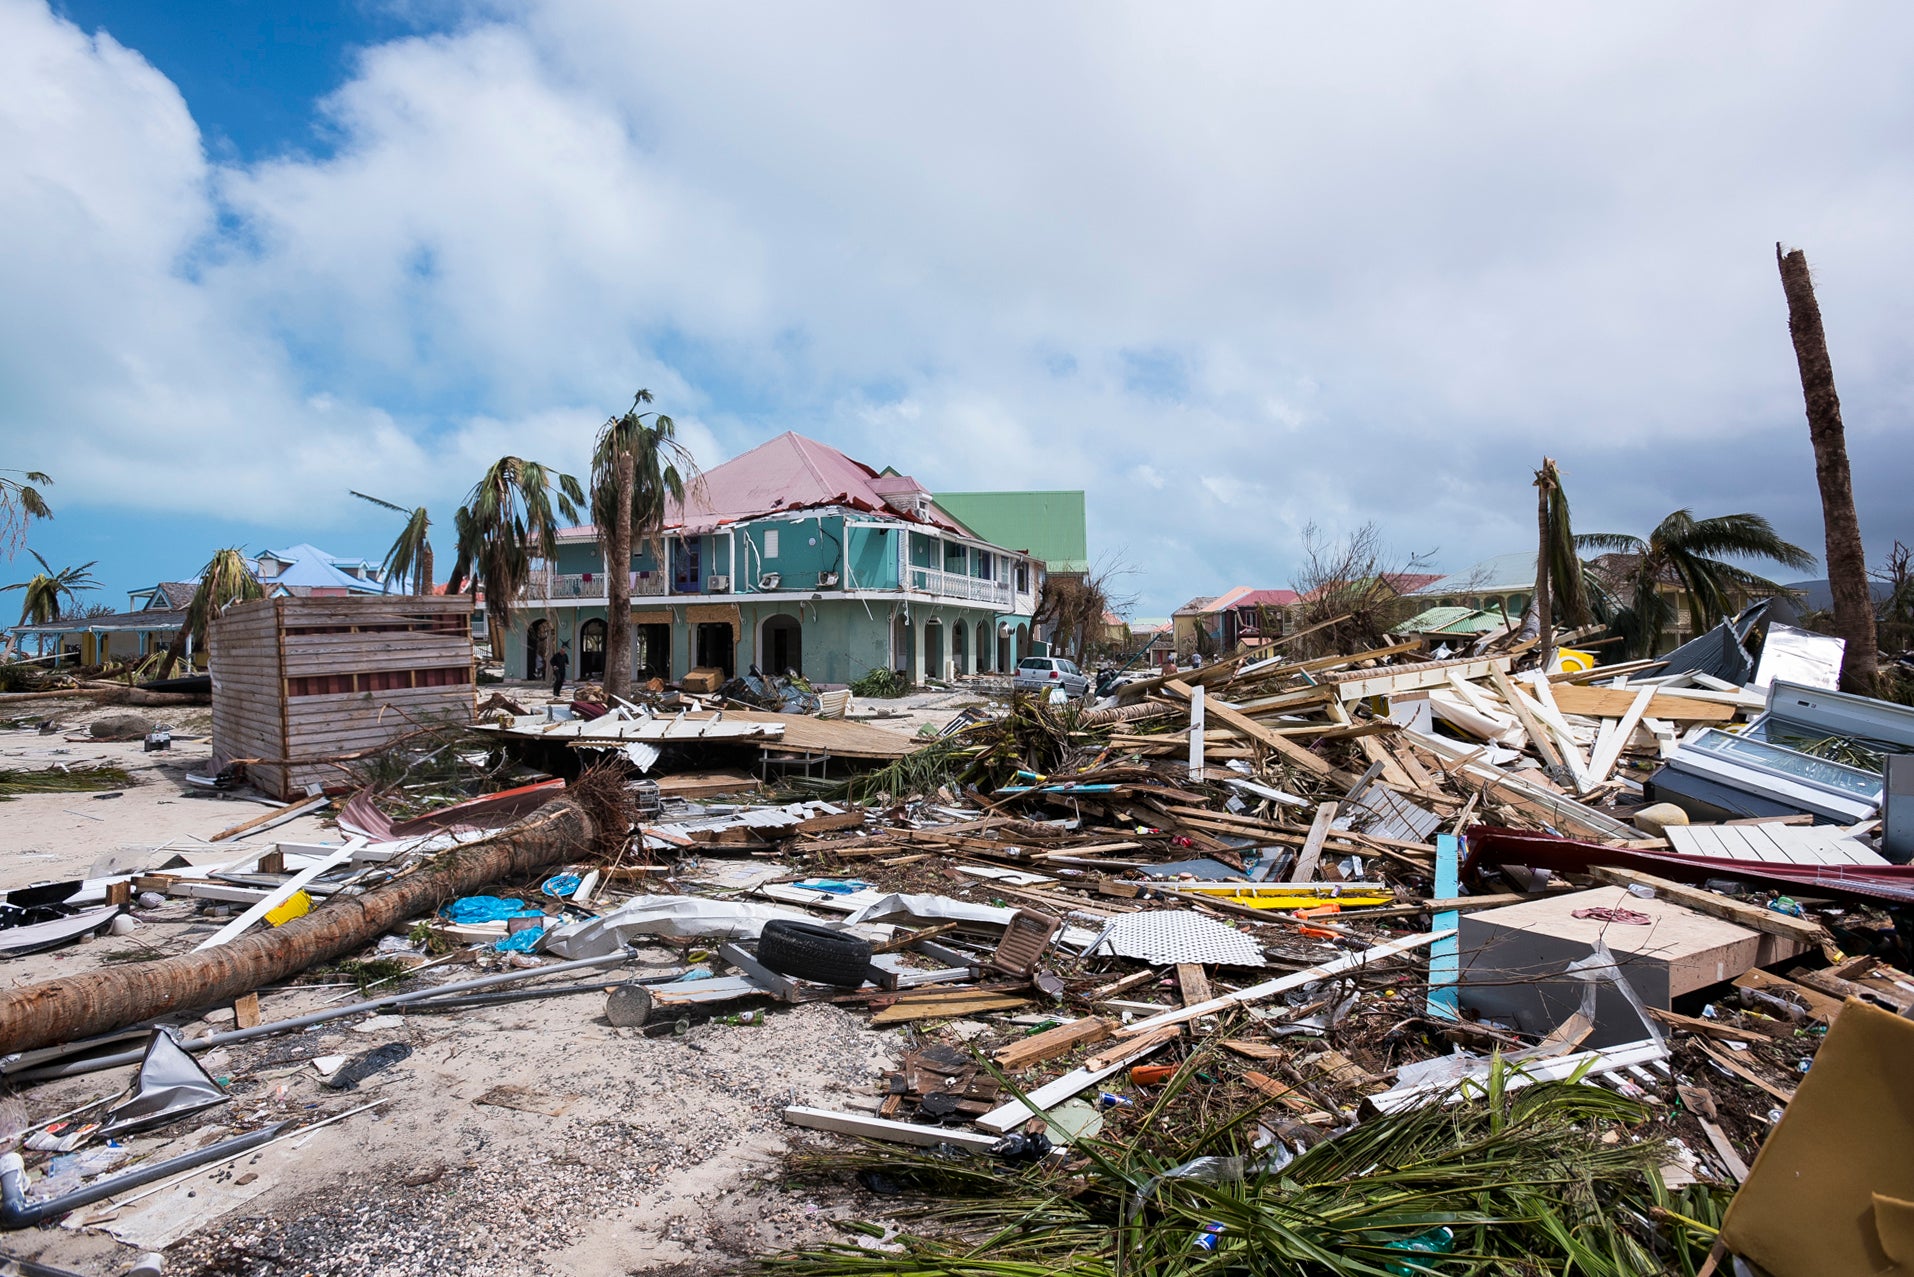 25 Photos Of Hurricane Irma Destruction That Prove We Need To Talk About Climate Change Now
